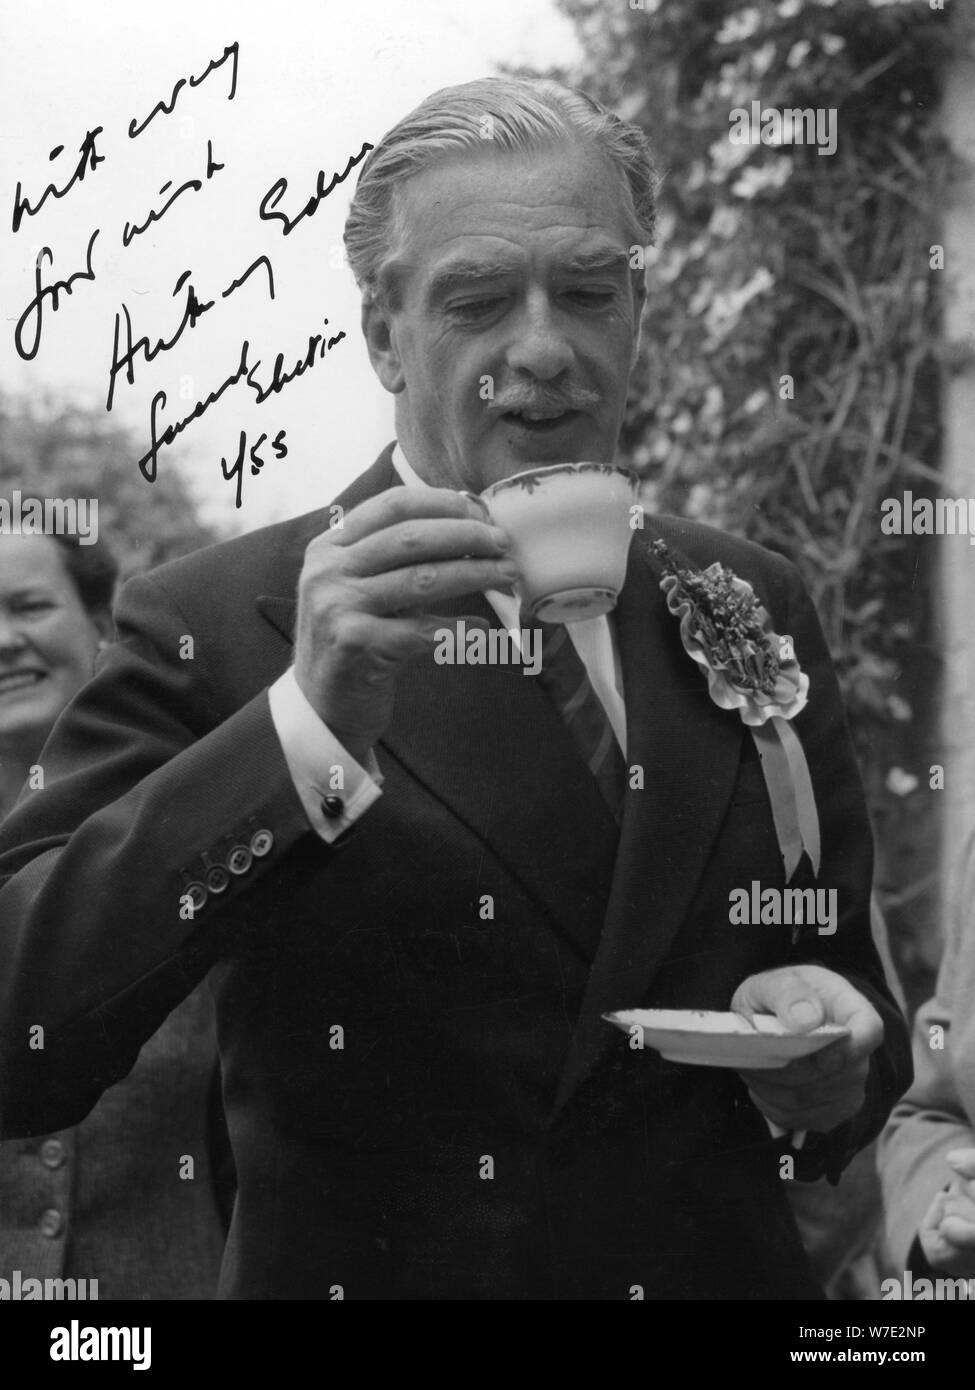 Anthony Eden, British Conservative politician, drinking a cup of tea, 1955. Artist: Unknown Stock Photo